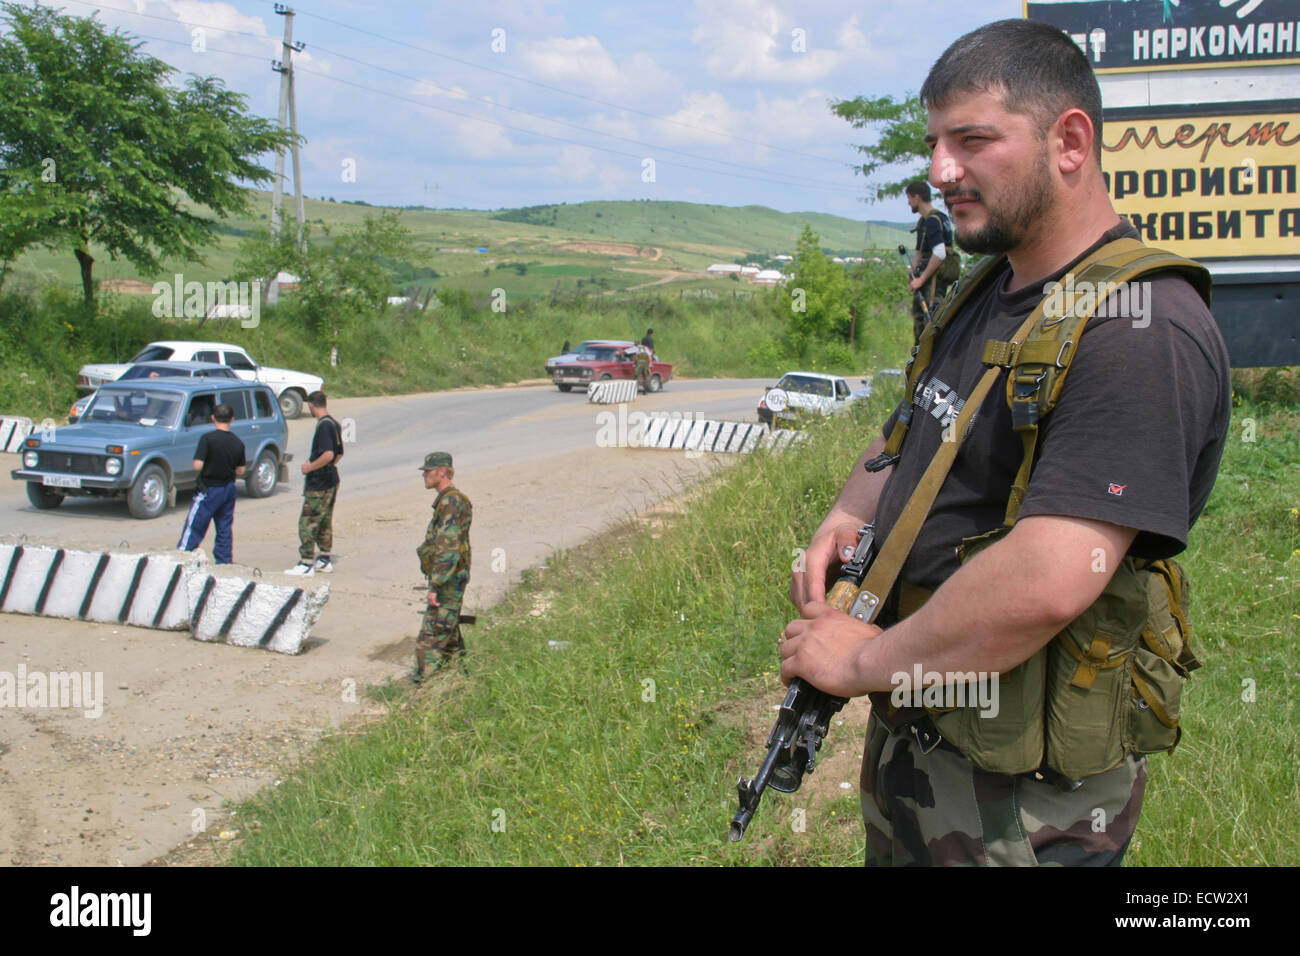 Members of the militia of Chechen leader Ramzan Kadyrov, the later president, at the entrance to the village of Tsentoroi, Chechnya, Russia. Stock Photo